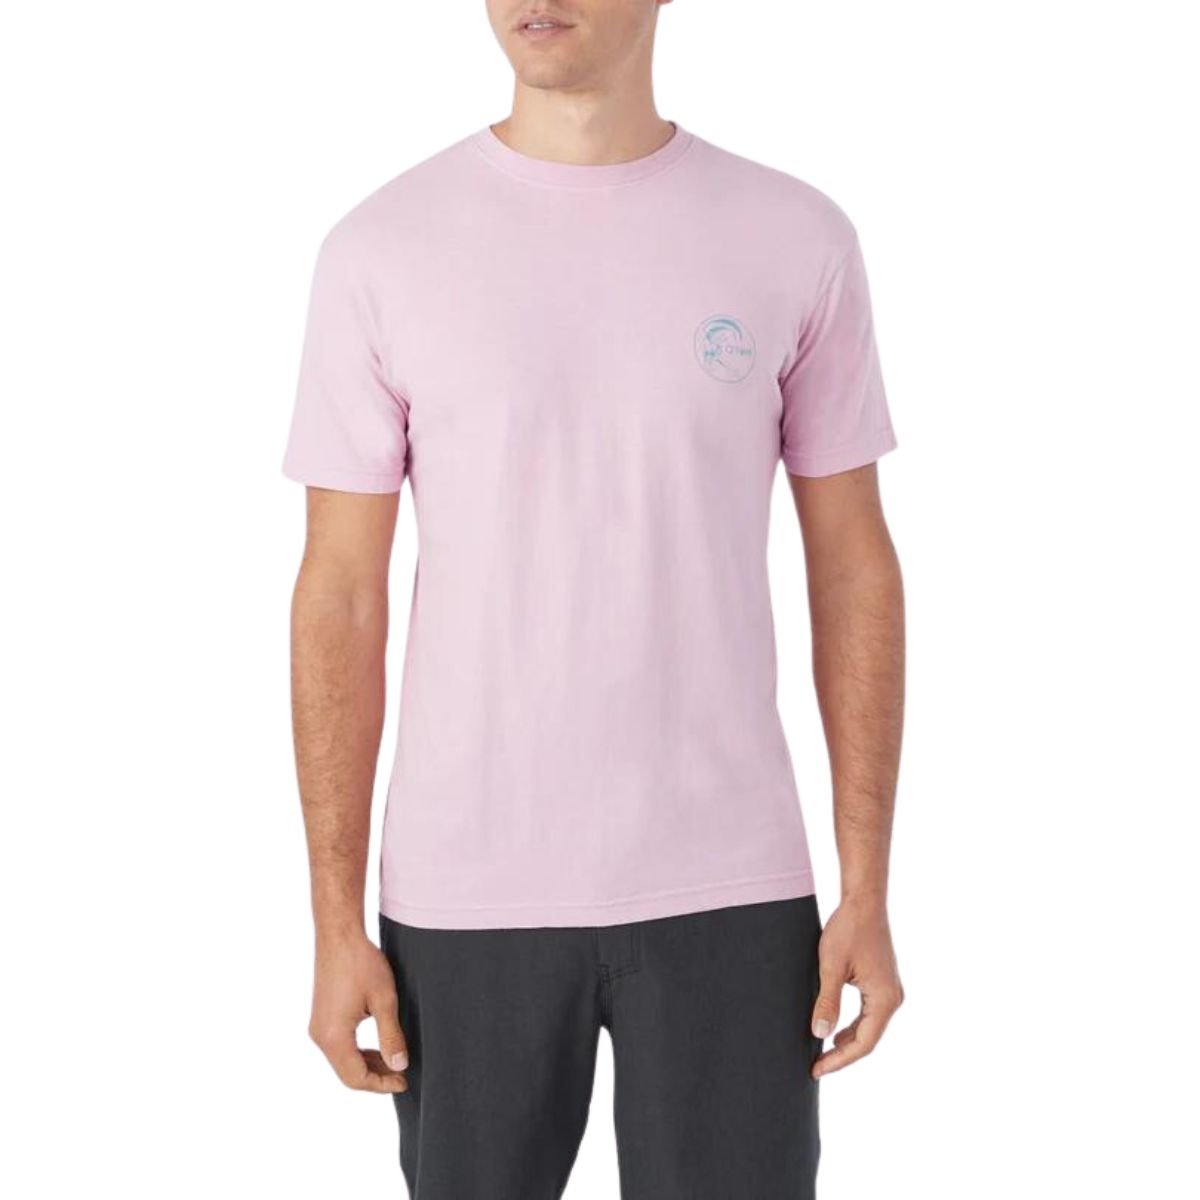 O'Neill OG Cleanlines Tee in Plum - BoardCo